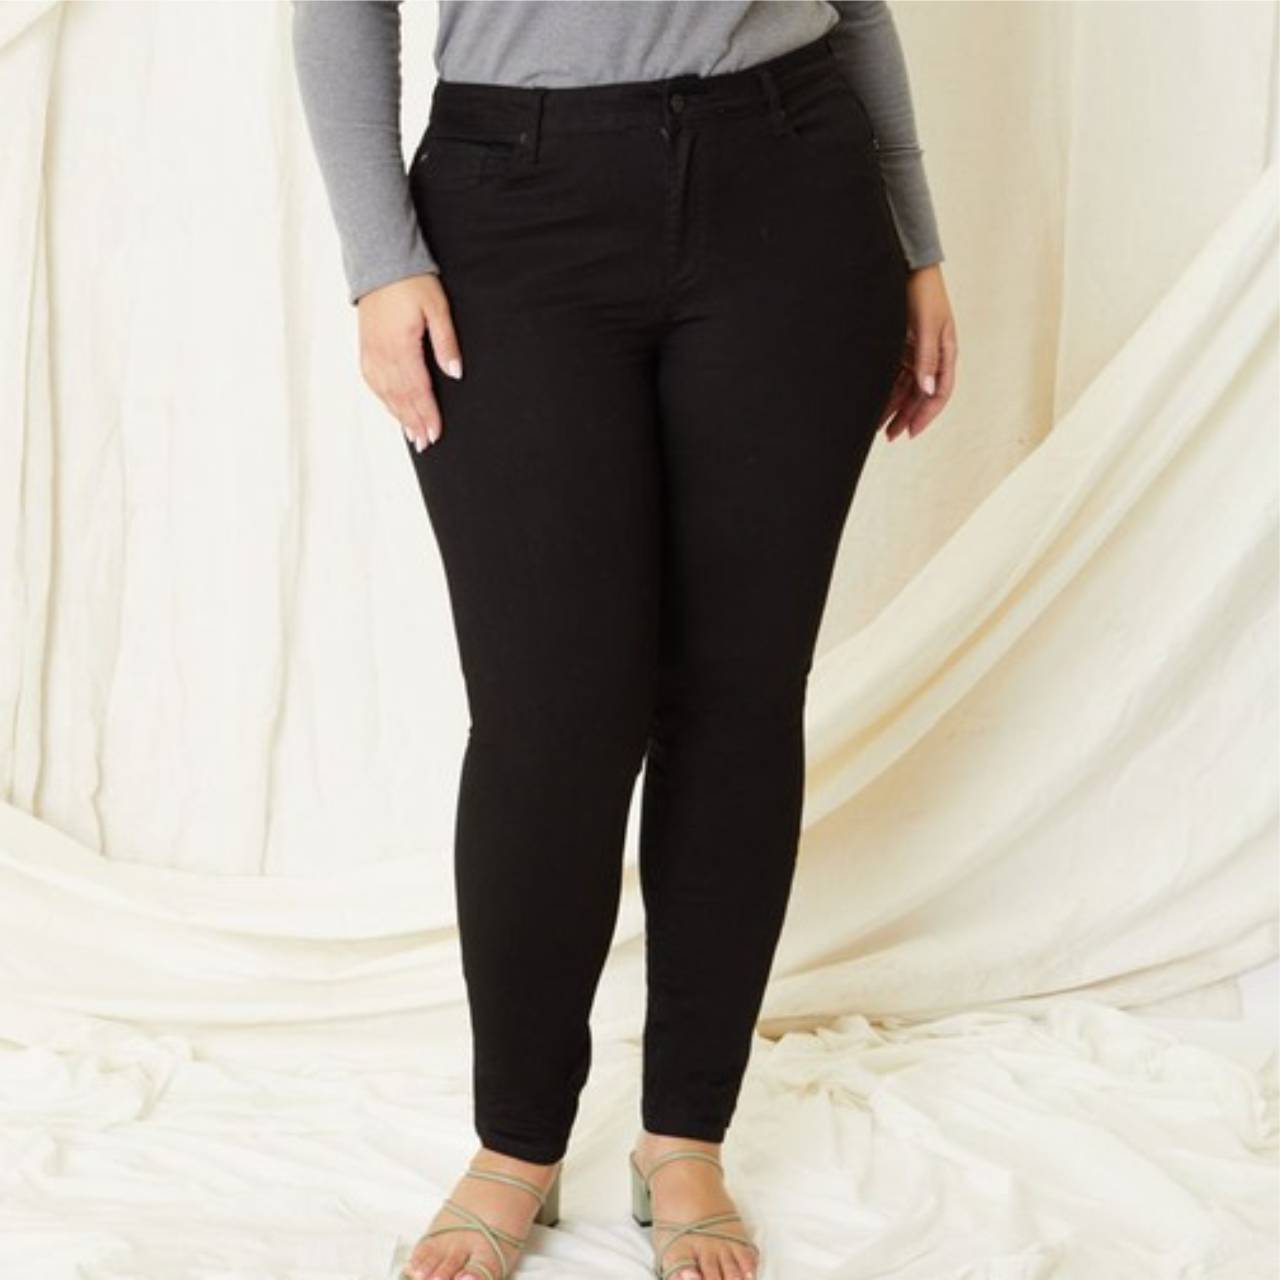 Plus Kancan Black High Rise Skinny Jeans - The Graphic Tee